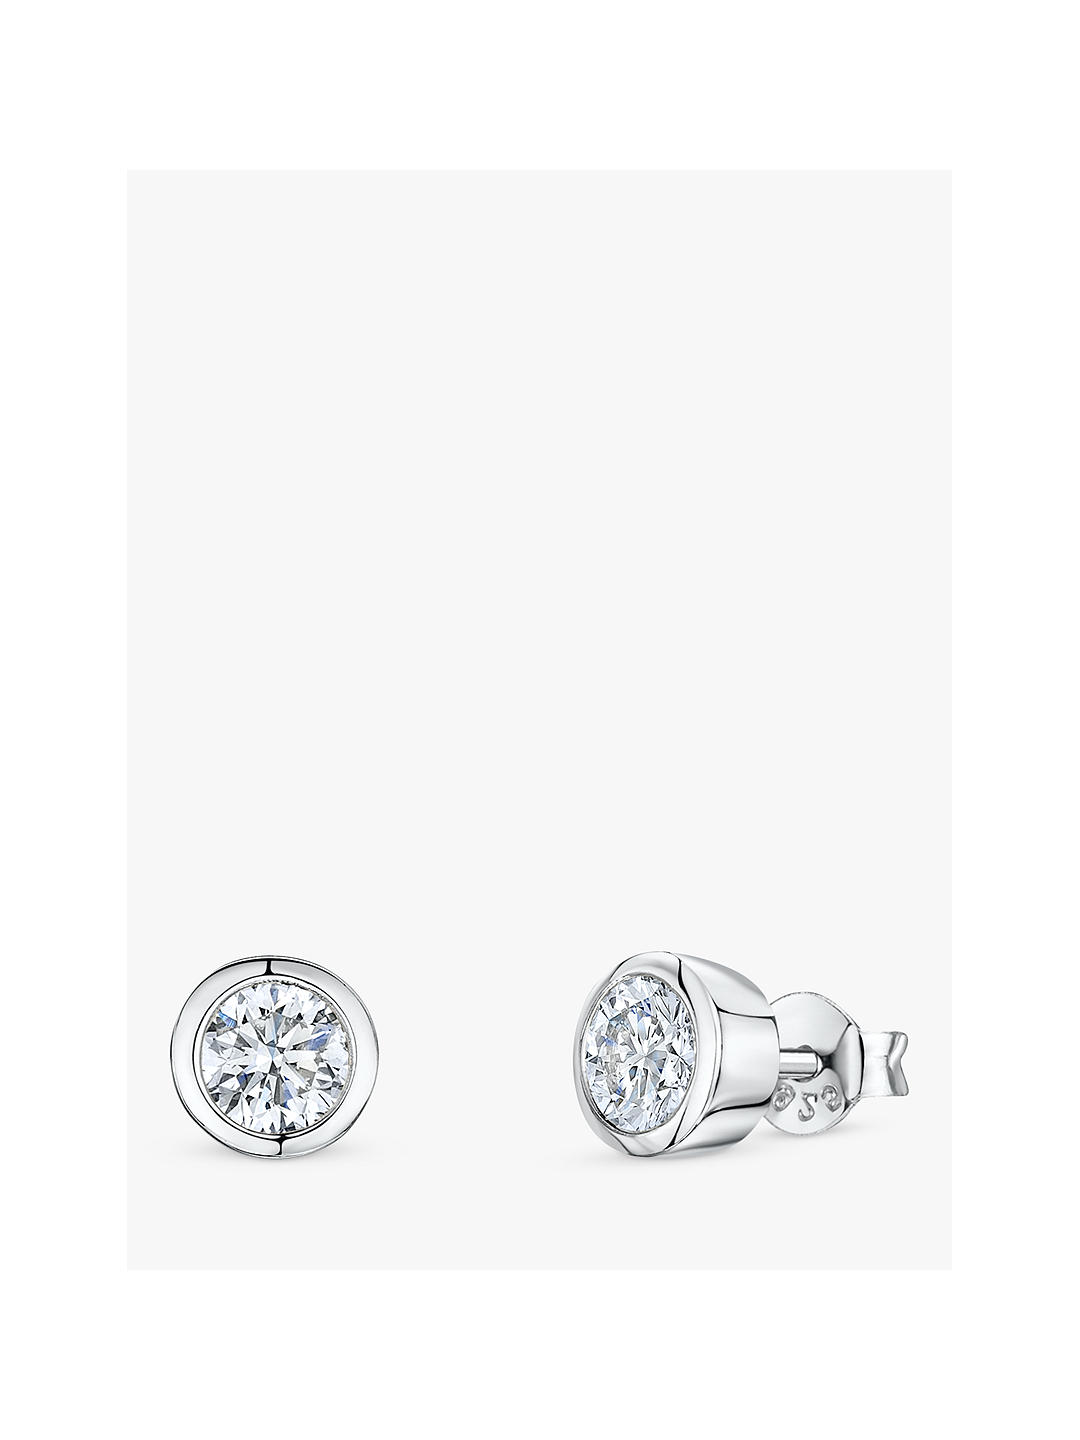 Jools by Jenny Brown 6.5mm Round Stud Earrings